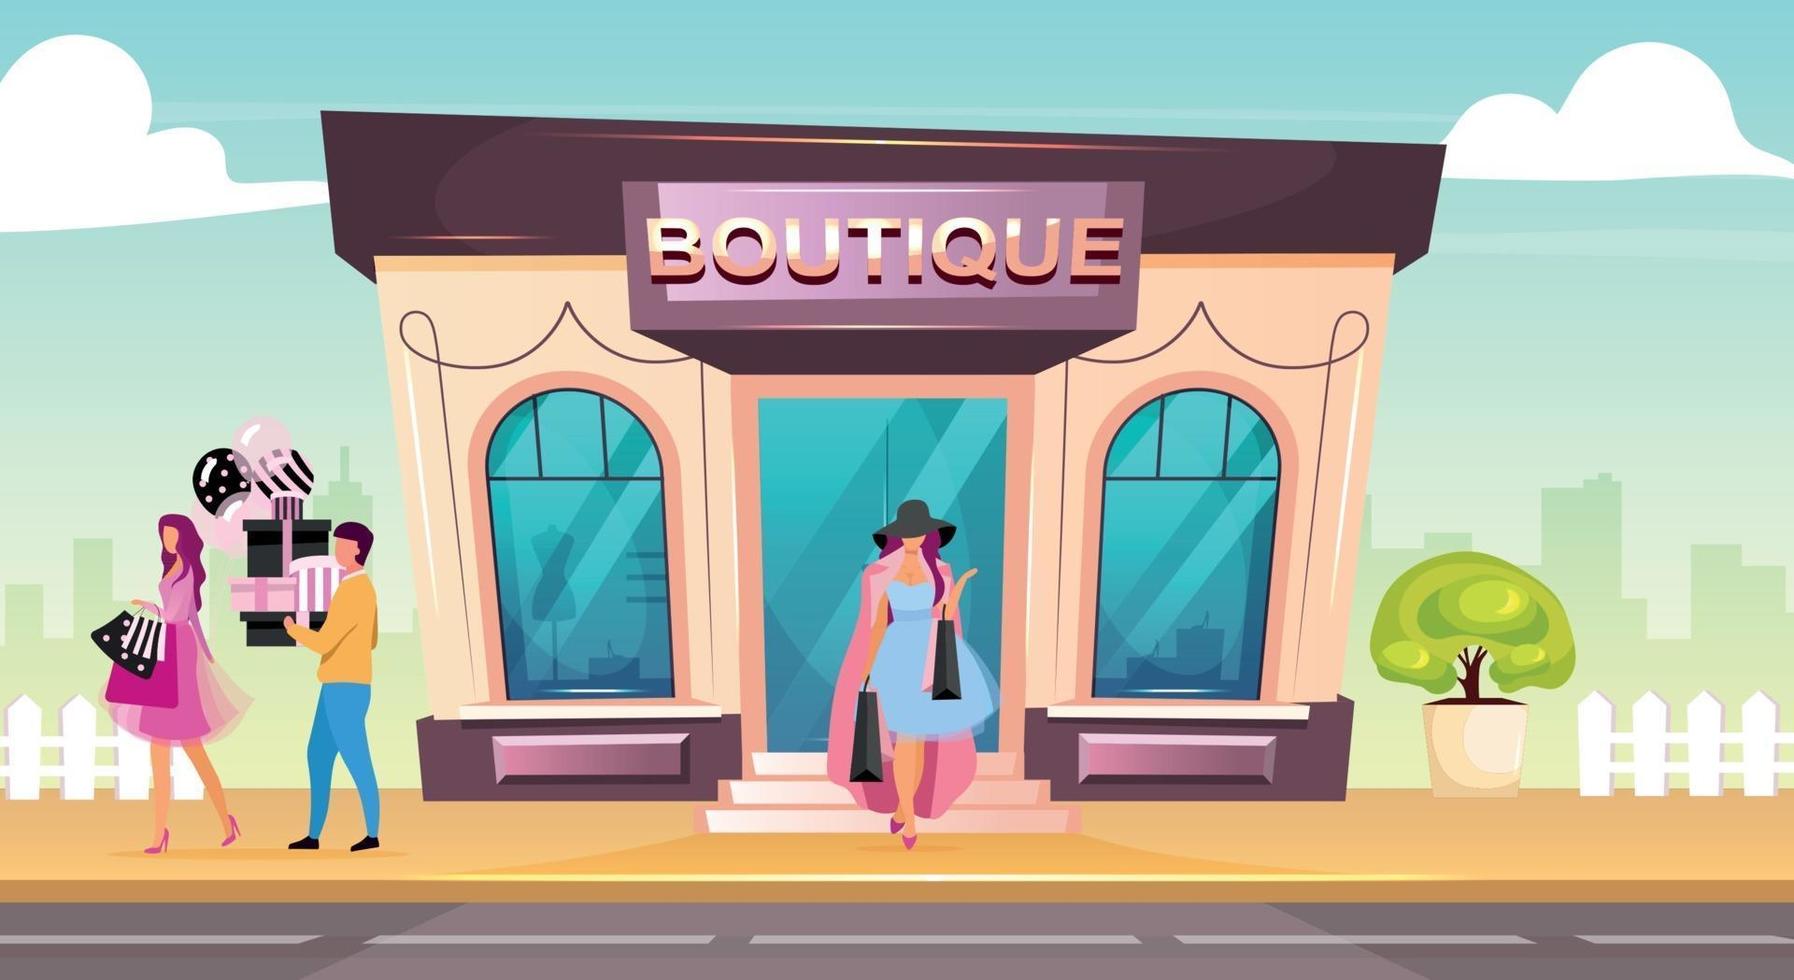 Boutique front flat color vector illustration. Woman buying clothes in premium shop. Luxury fashion store for garment purchase. Modern 2D cartoon cityscape with customers on background